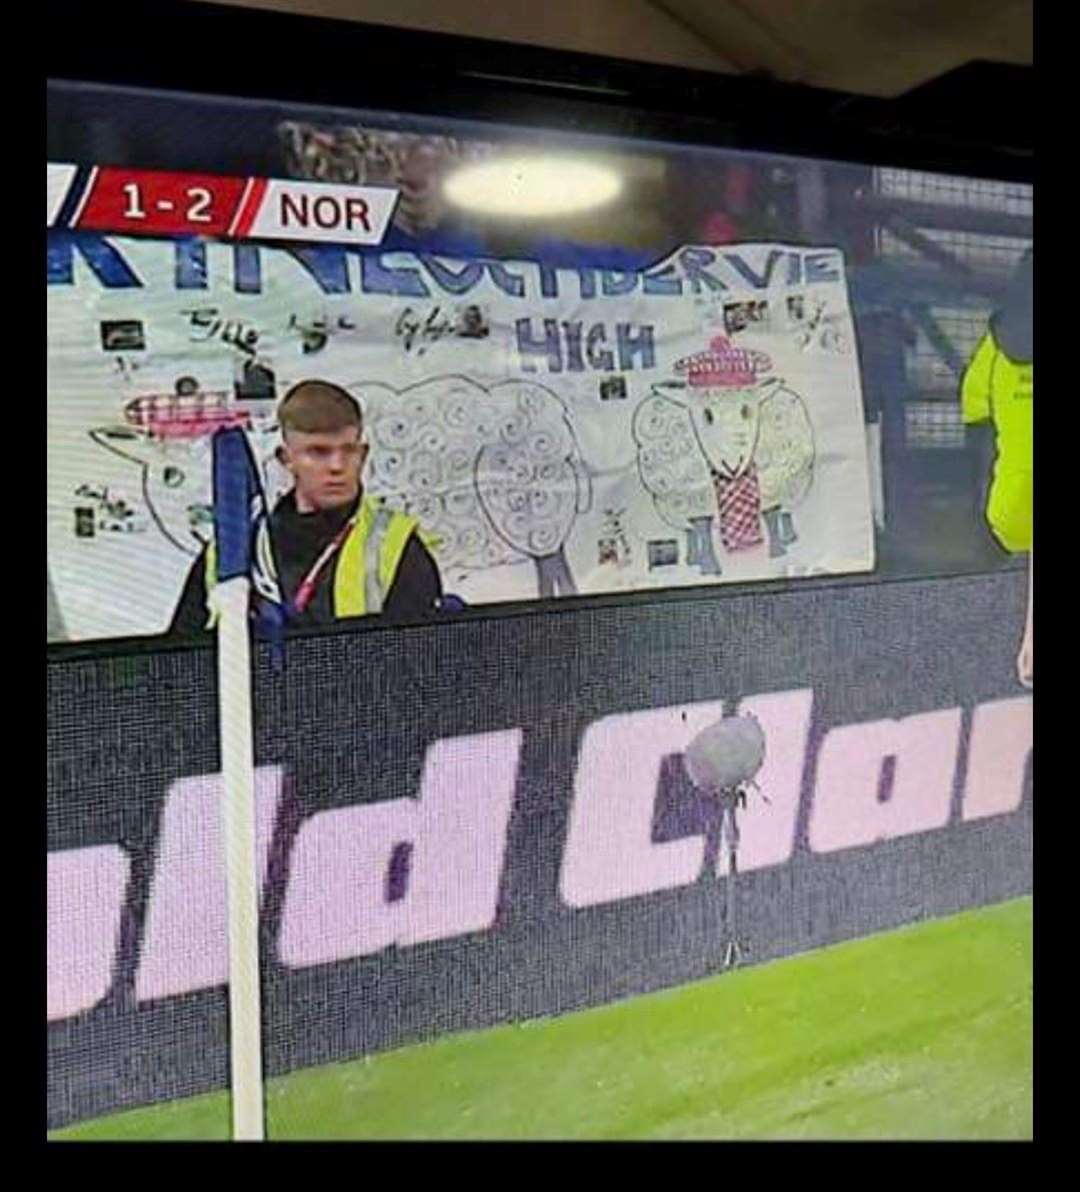 Kinlochbervie High School's famous sheep banner was shown several times on the tv broadcast of the match.